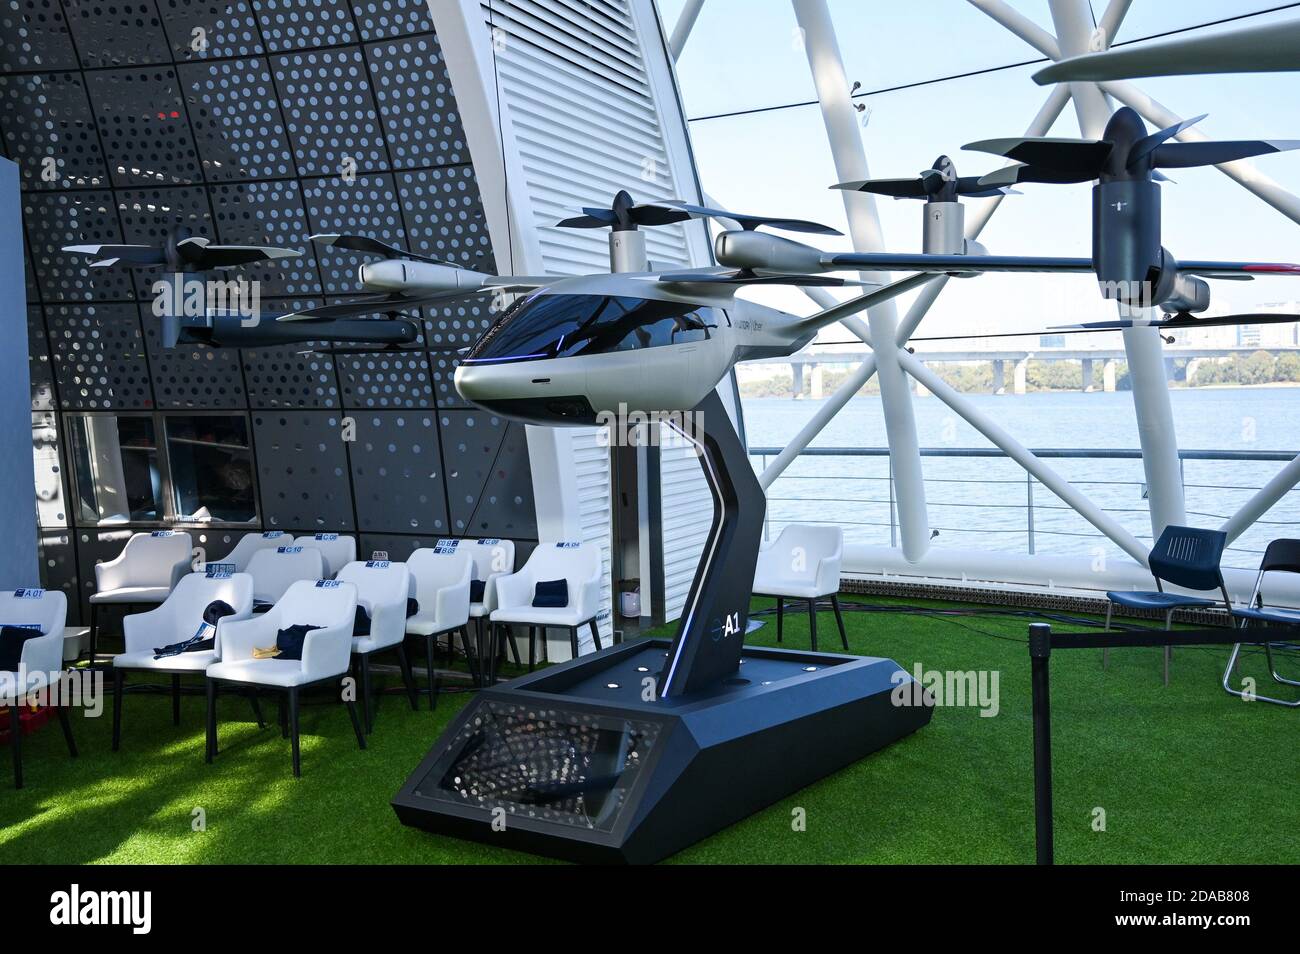 Seoul, South Korea. 11th Nov, 2020. Hyundai Motors showed off a scale model  of drone taxi it is developing in conjunction with Uber in Seoul, South  Korea on Wednesday, November 11, 2020.